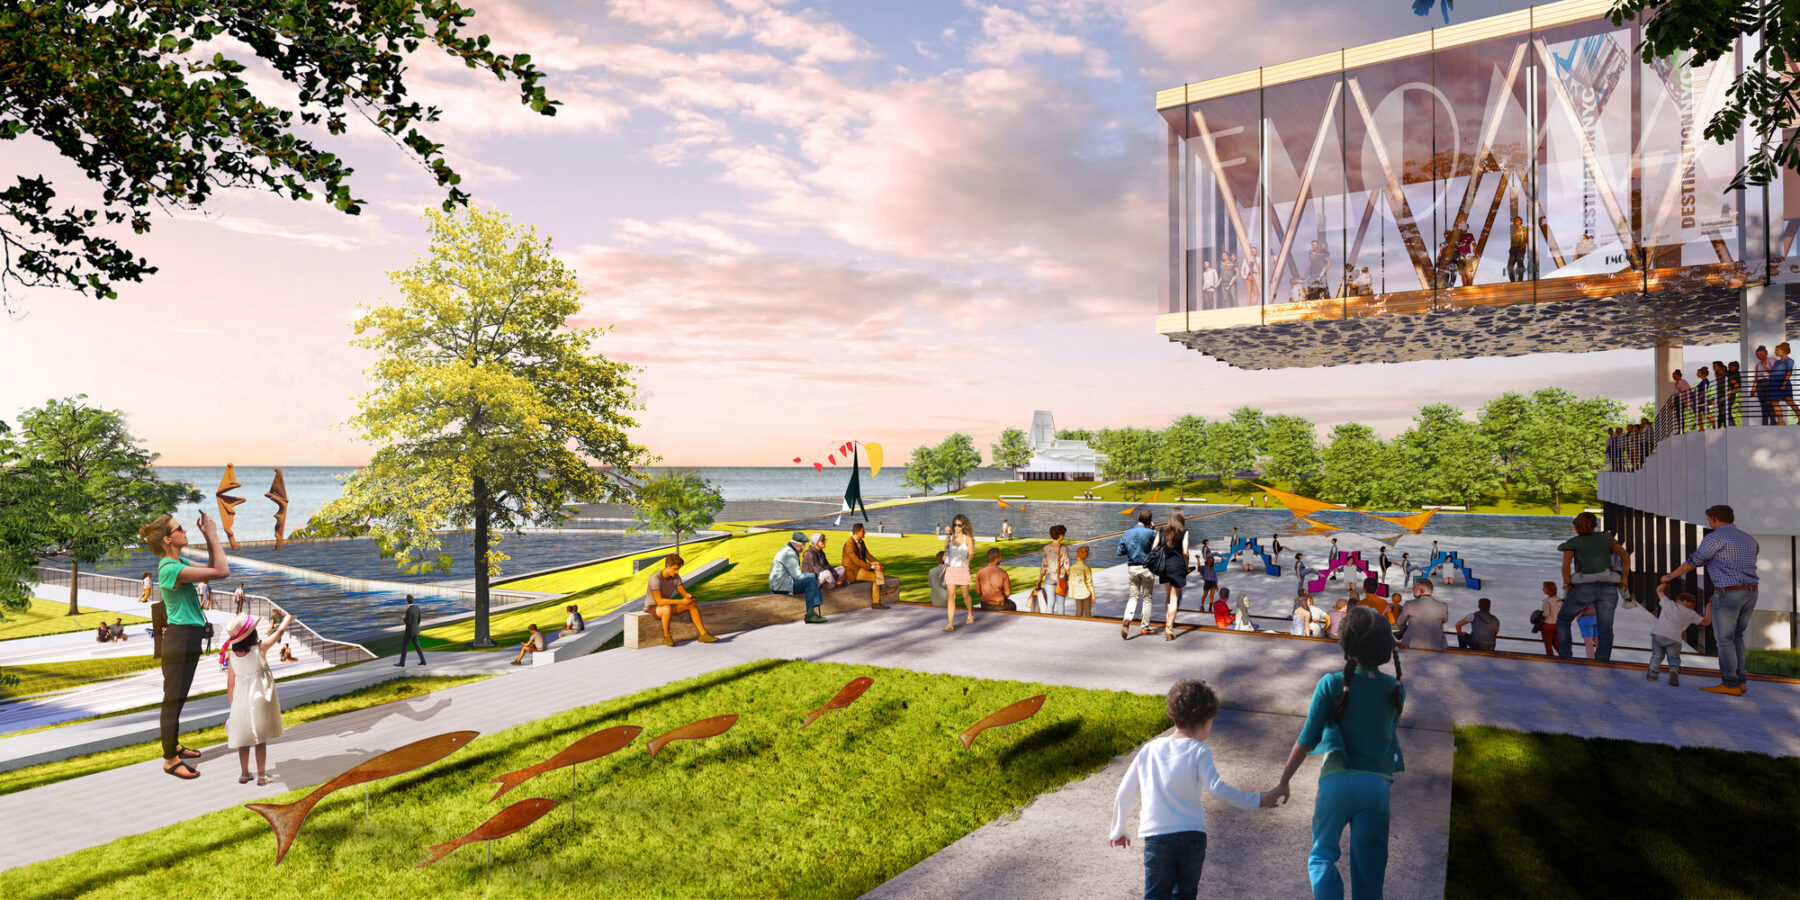 rendering of people in waterfront park space with water features and overlooks